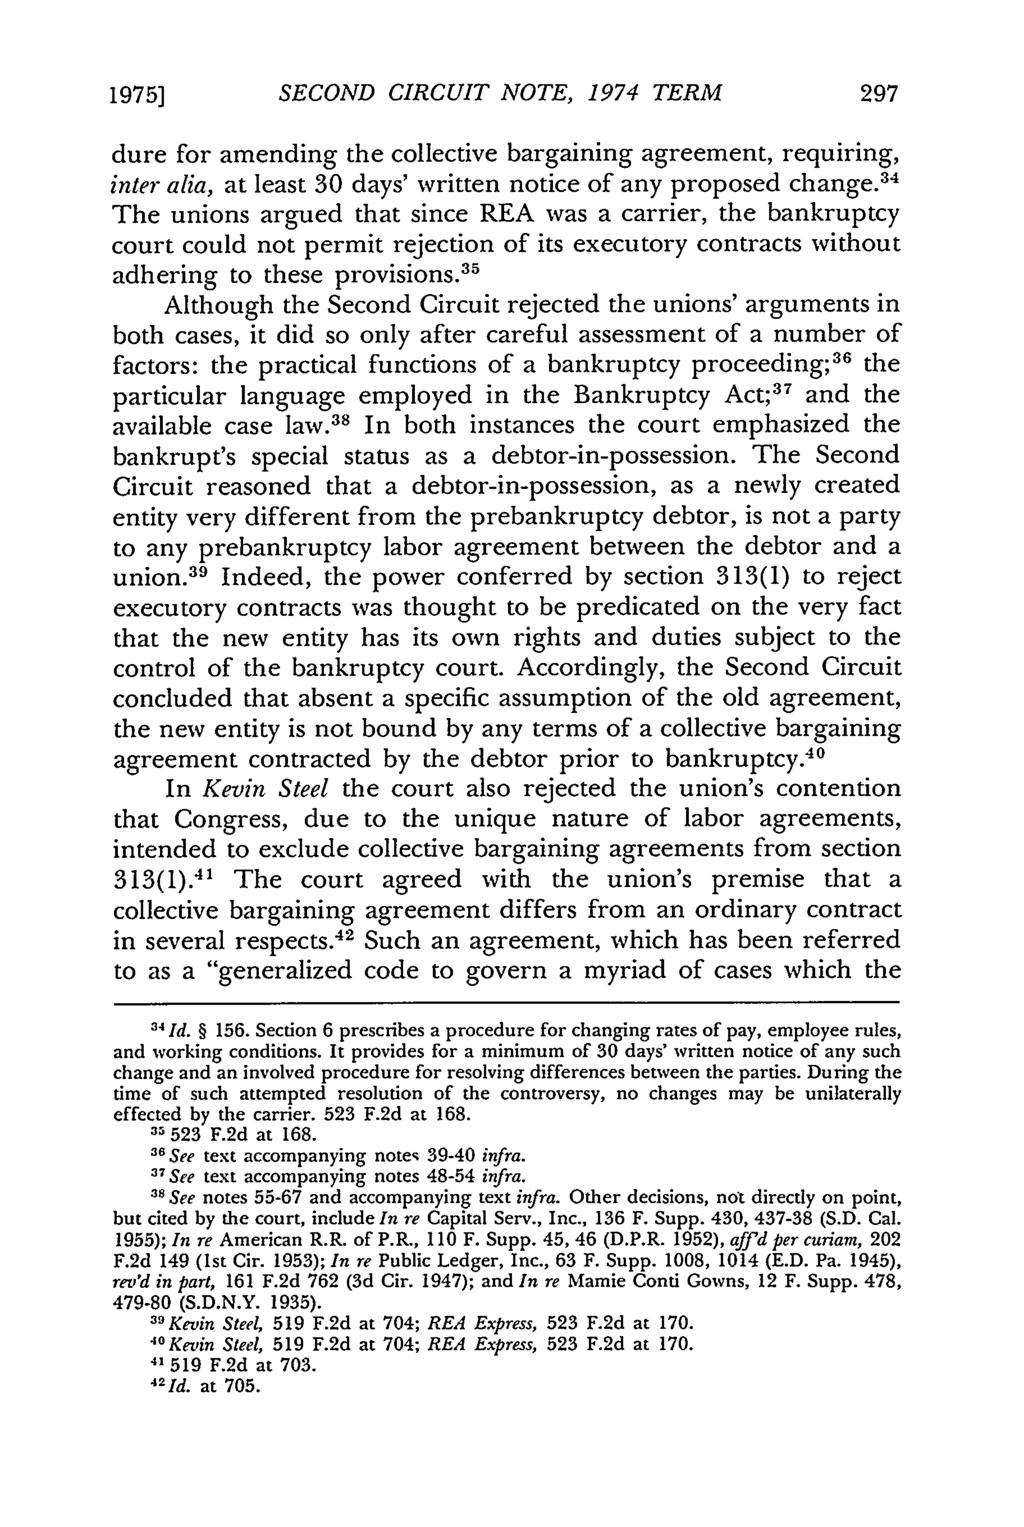 1975] SECOND CIRCUIT NOTE, 1974 TERM dure for amending the collective bargaining agreement, requiring, inter alia, at least 30 days' written notice of any proposed change.